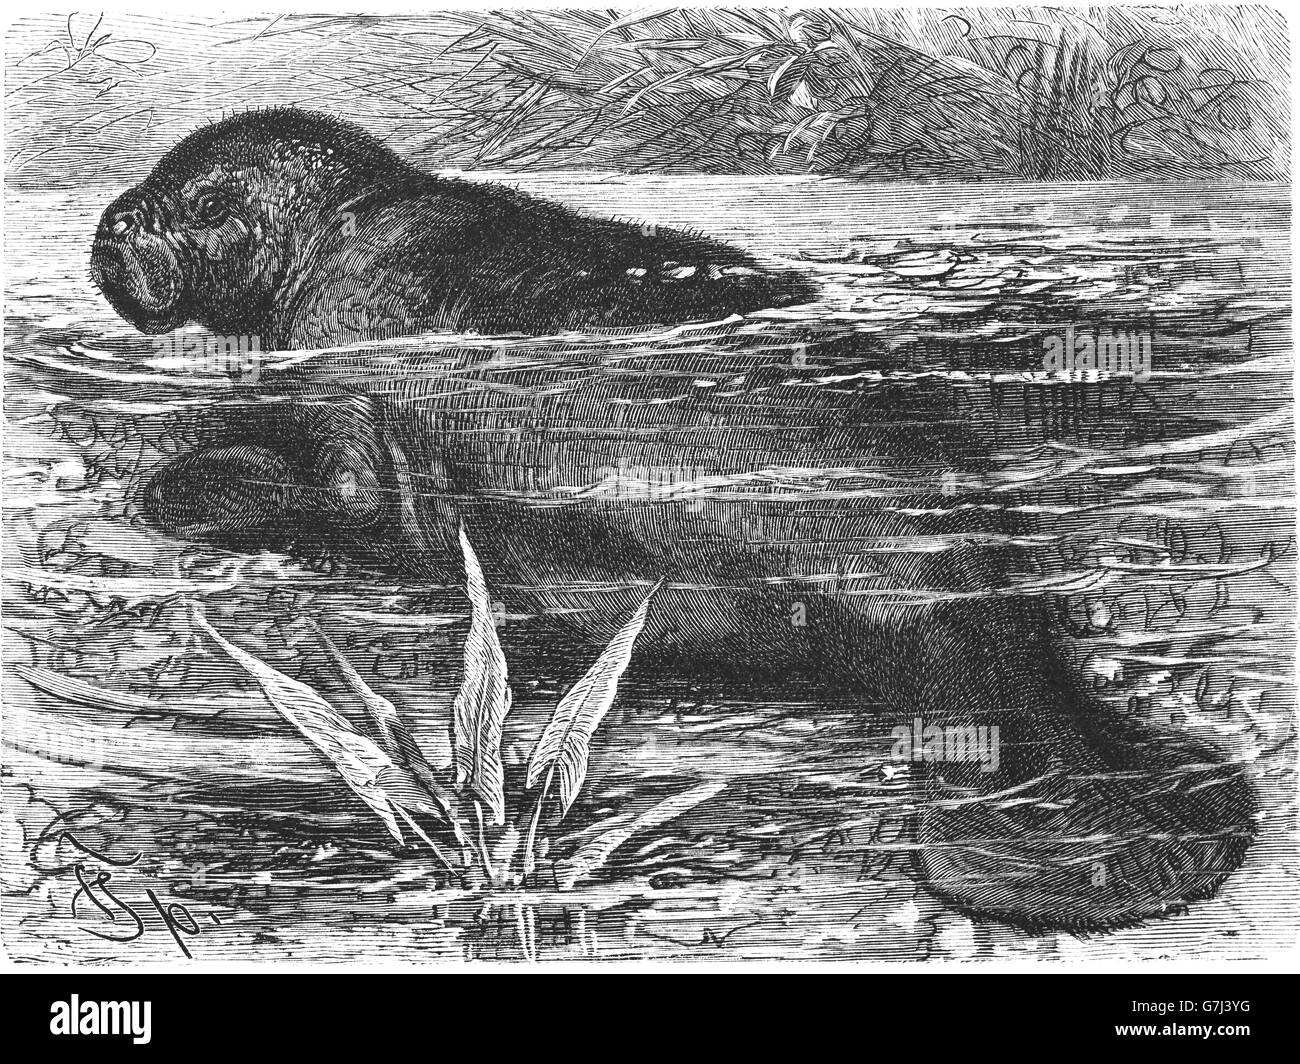 Manatee, Trichechus, Sirenia, Trichechidae, illustration from book dated 1904 Stock Photo